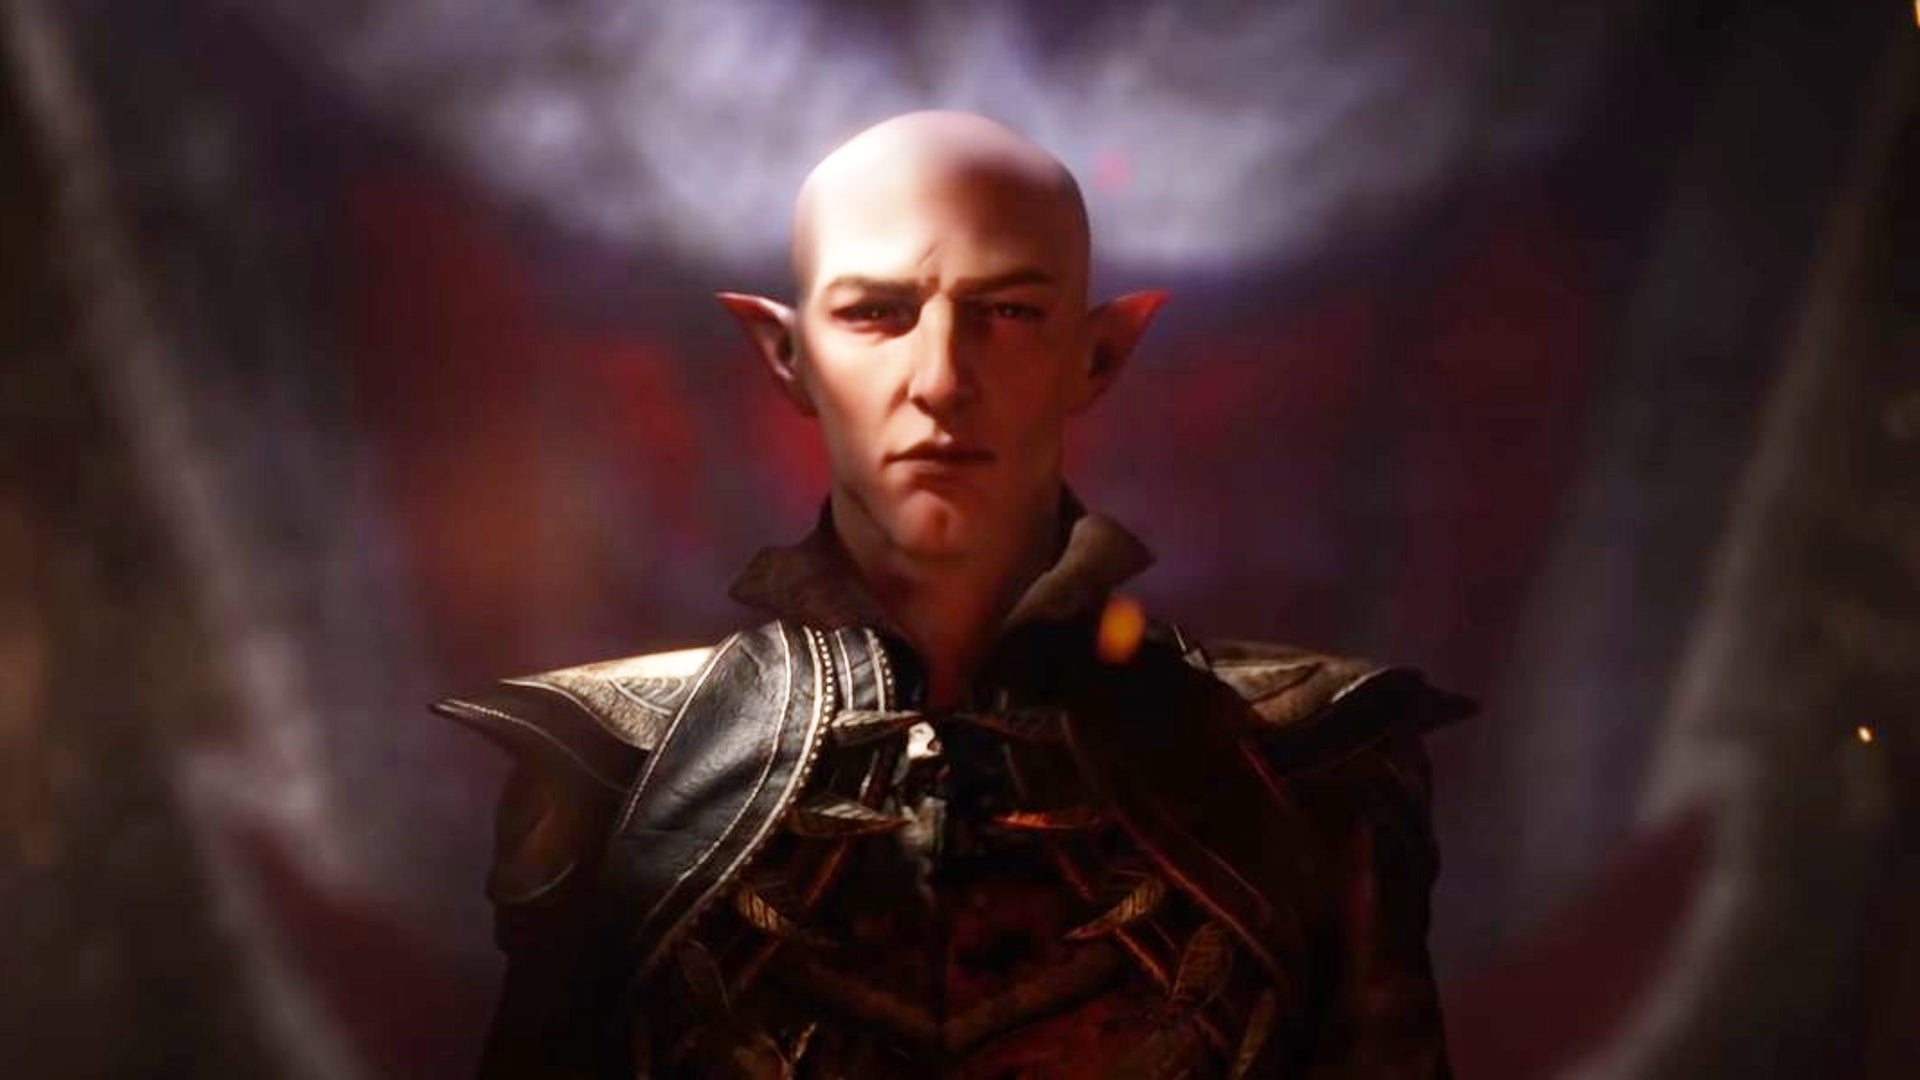 Dragon Age 4 will see the return of Solas, the dodgy elf